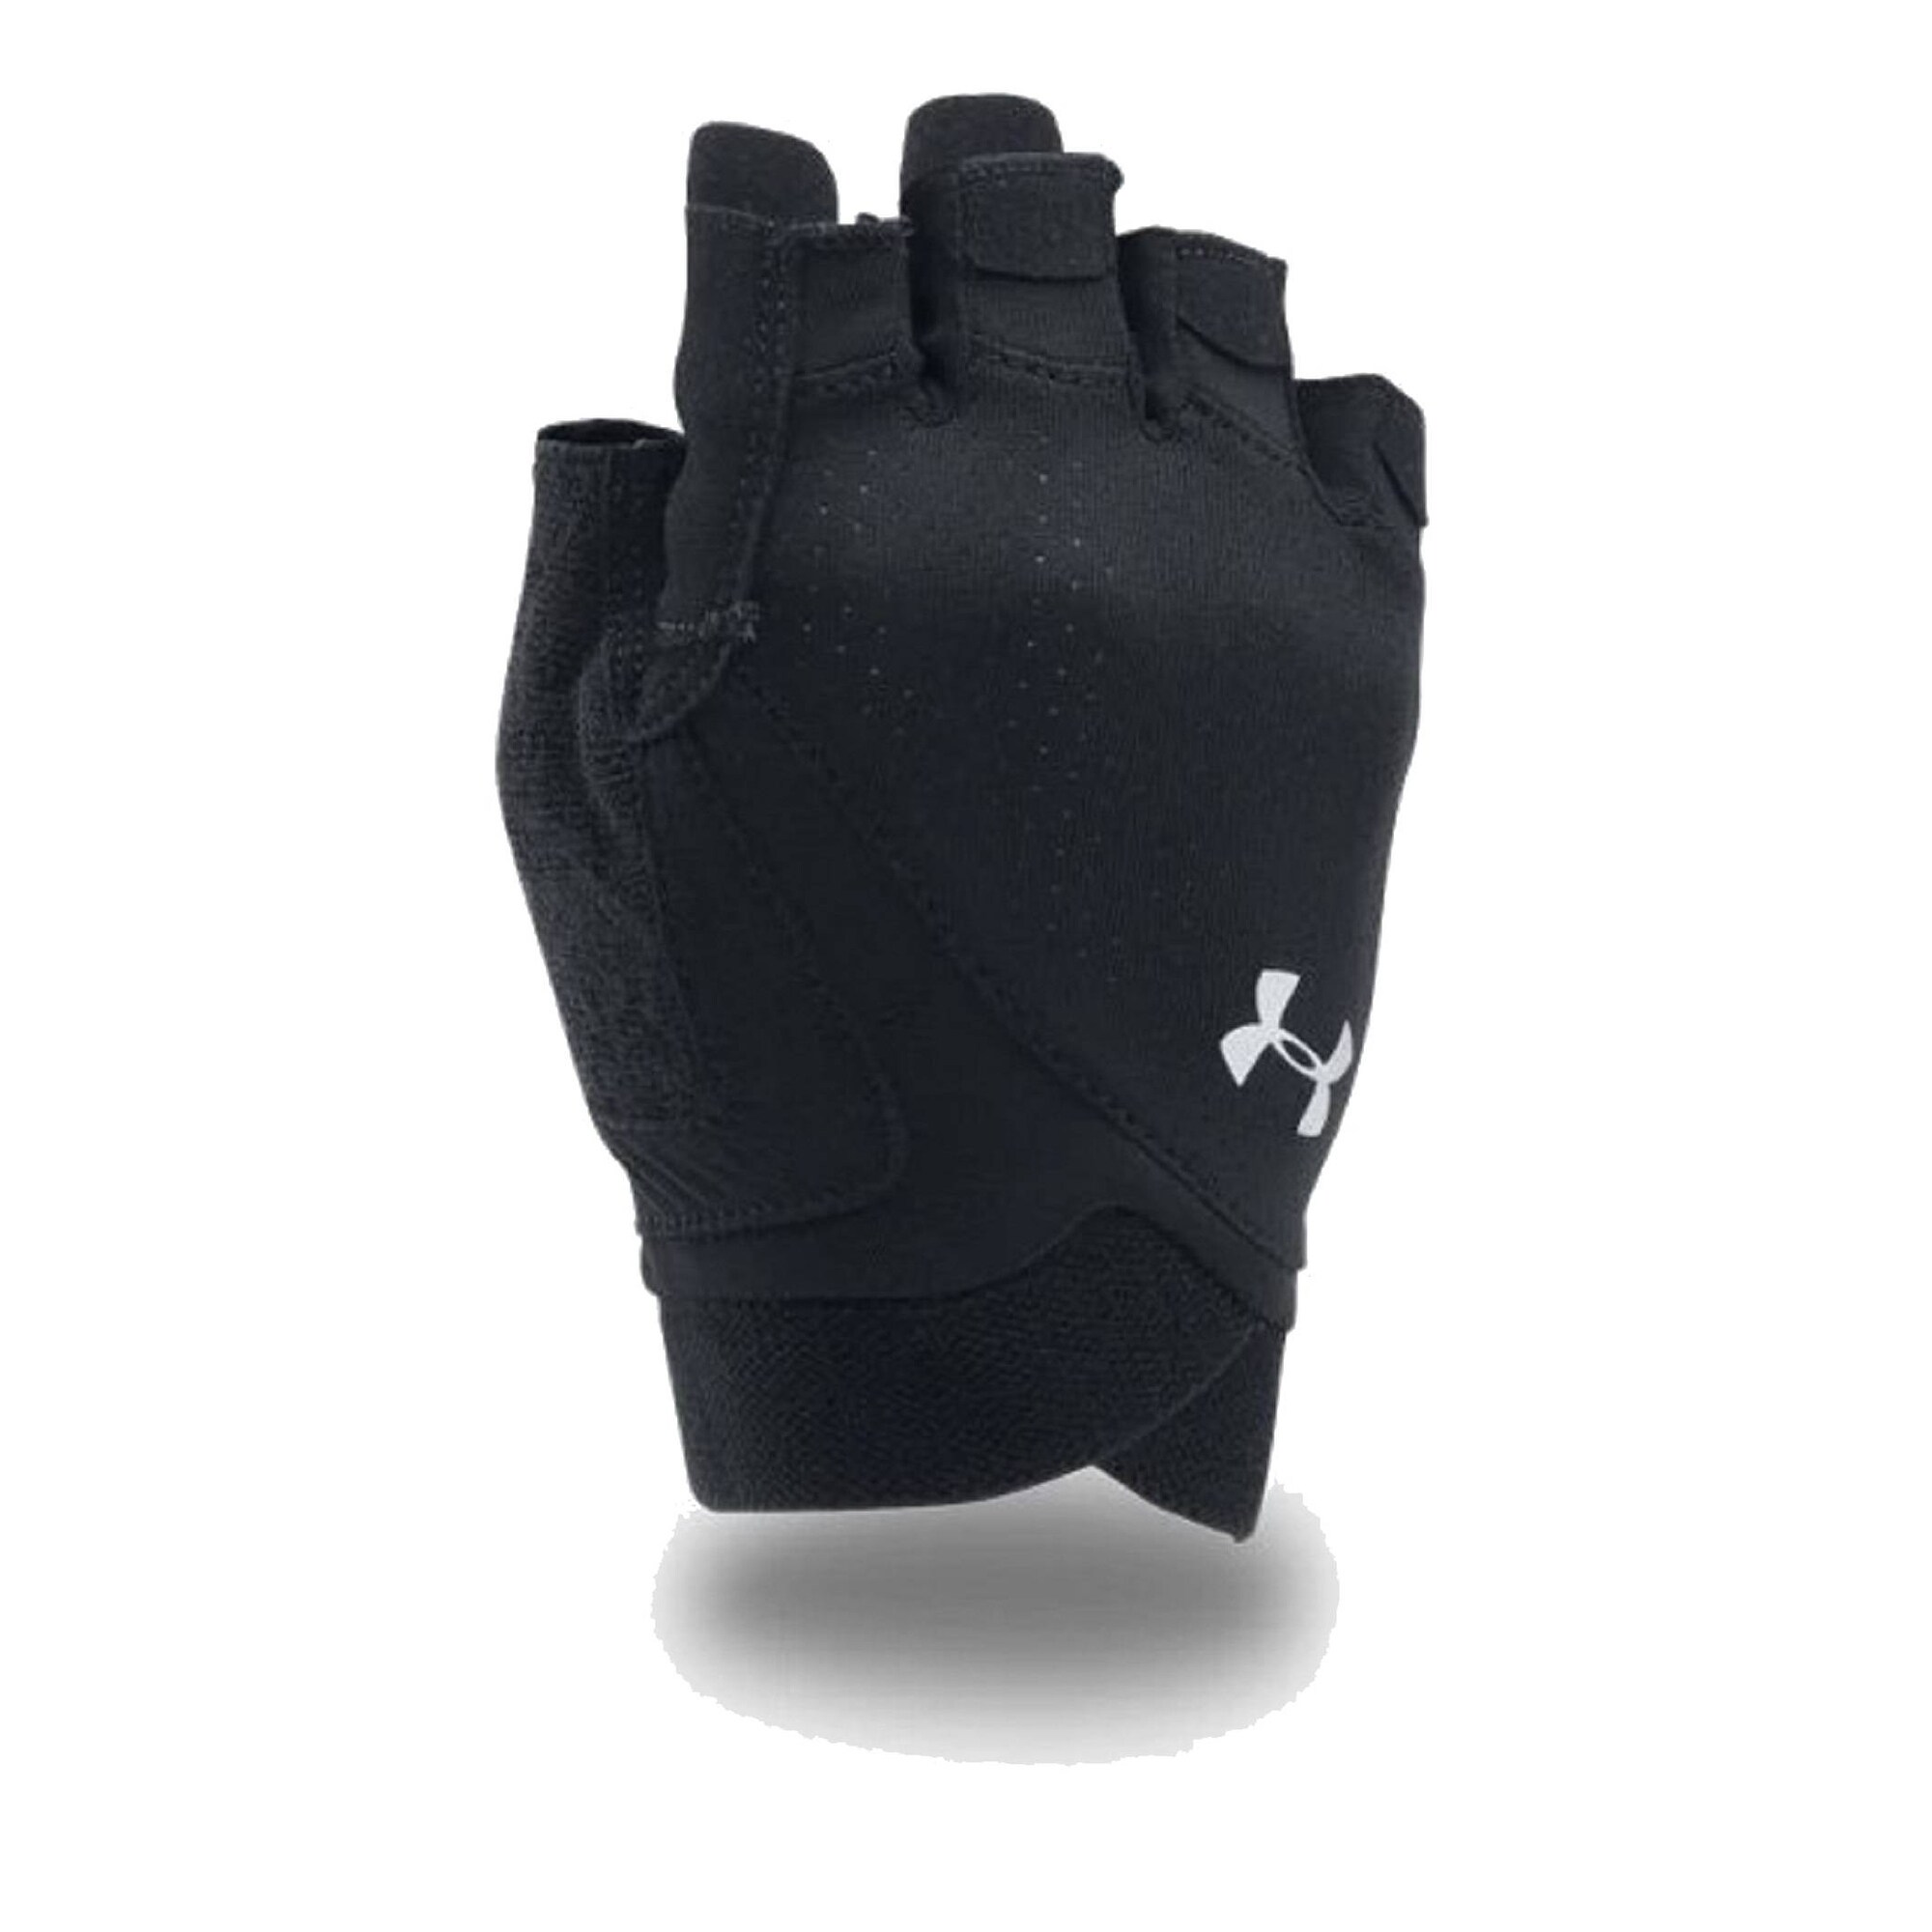 L Under Armour Men's UA CoolSwitch Flux Training Gloves New 1290823 M 